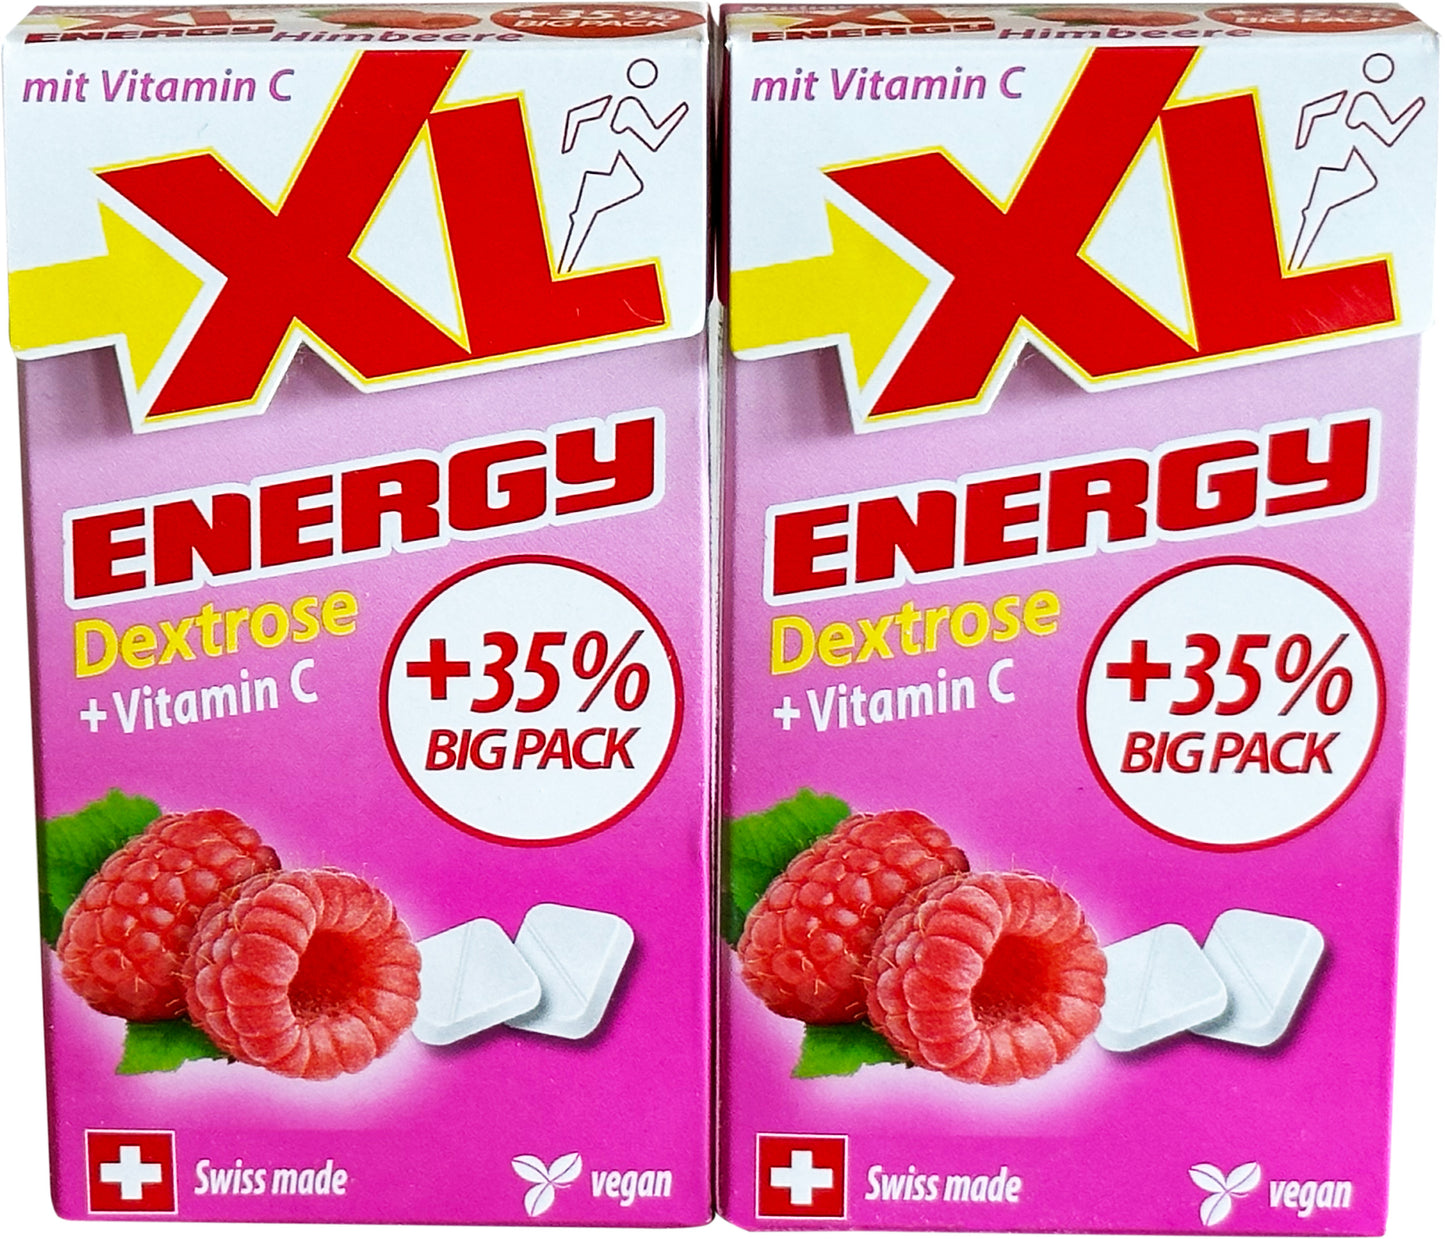 XL-Energy Himbeere Duo BIG PACK 2 x 67,5g